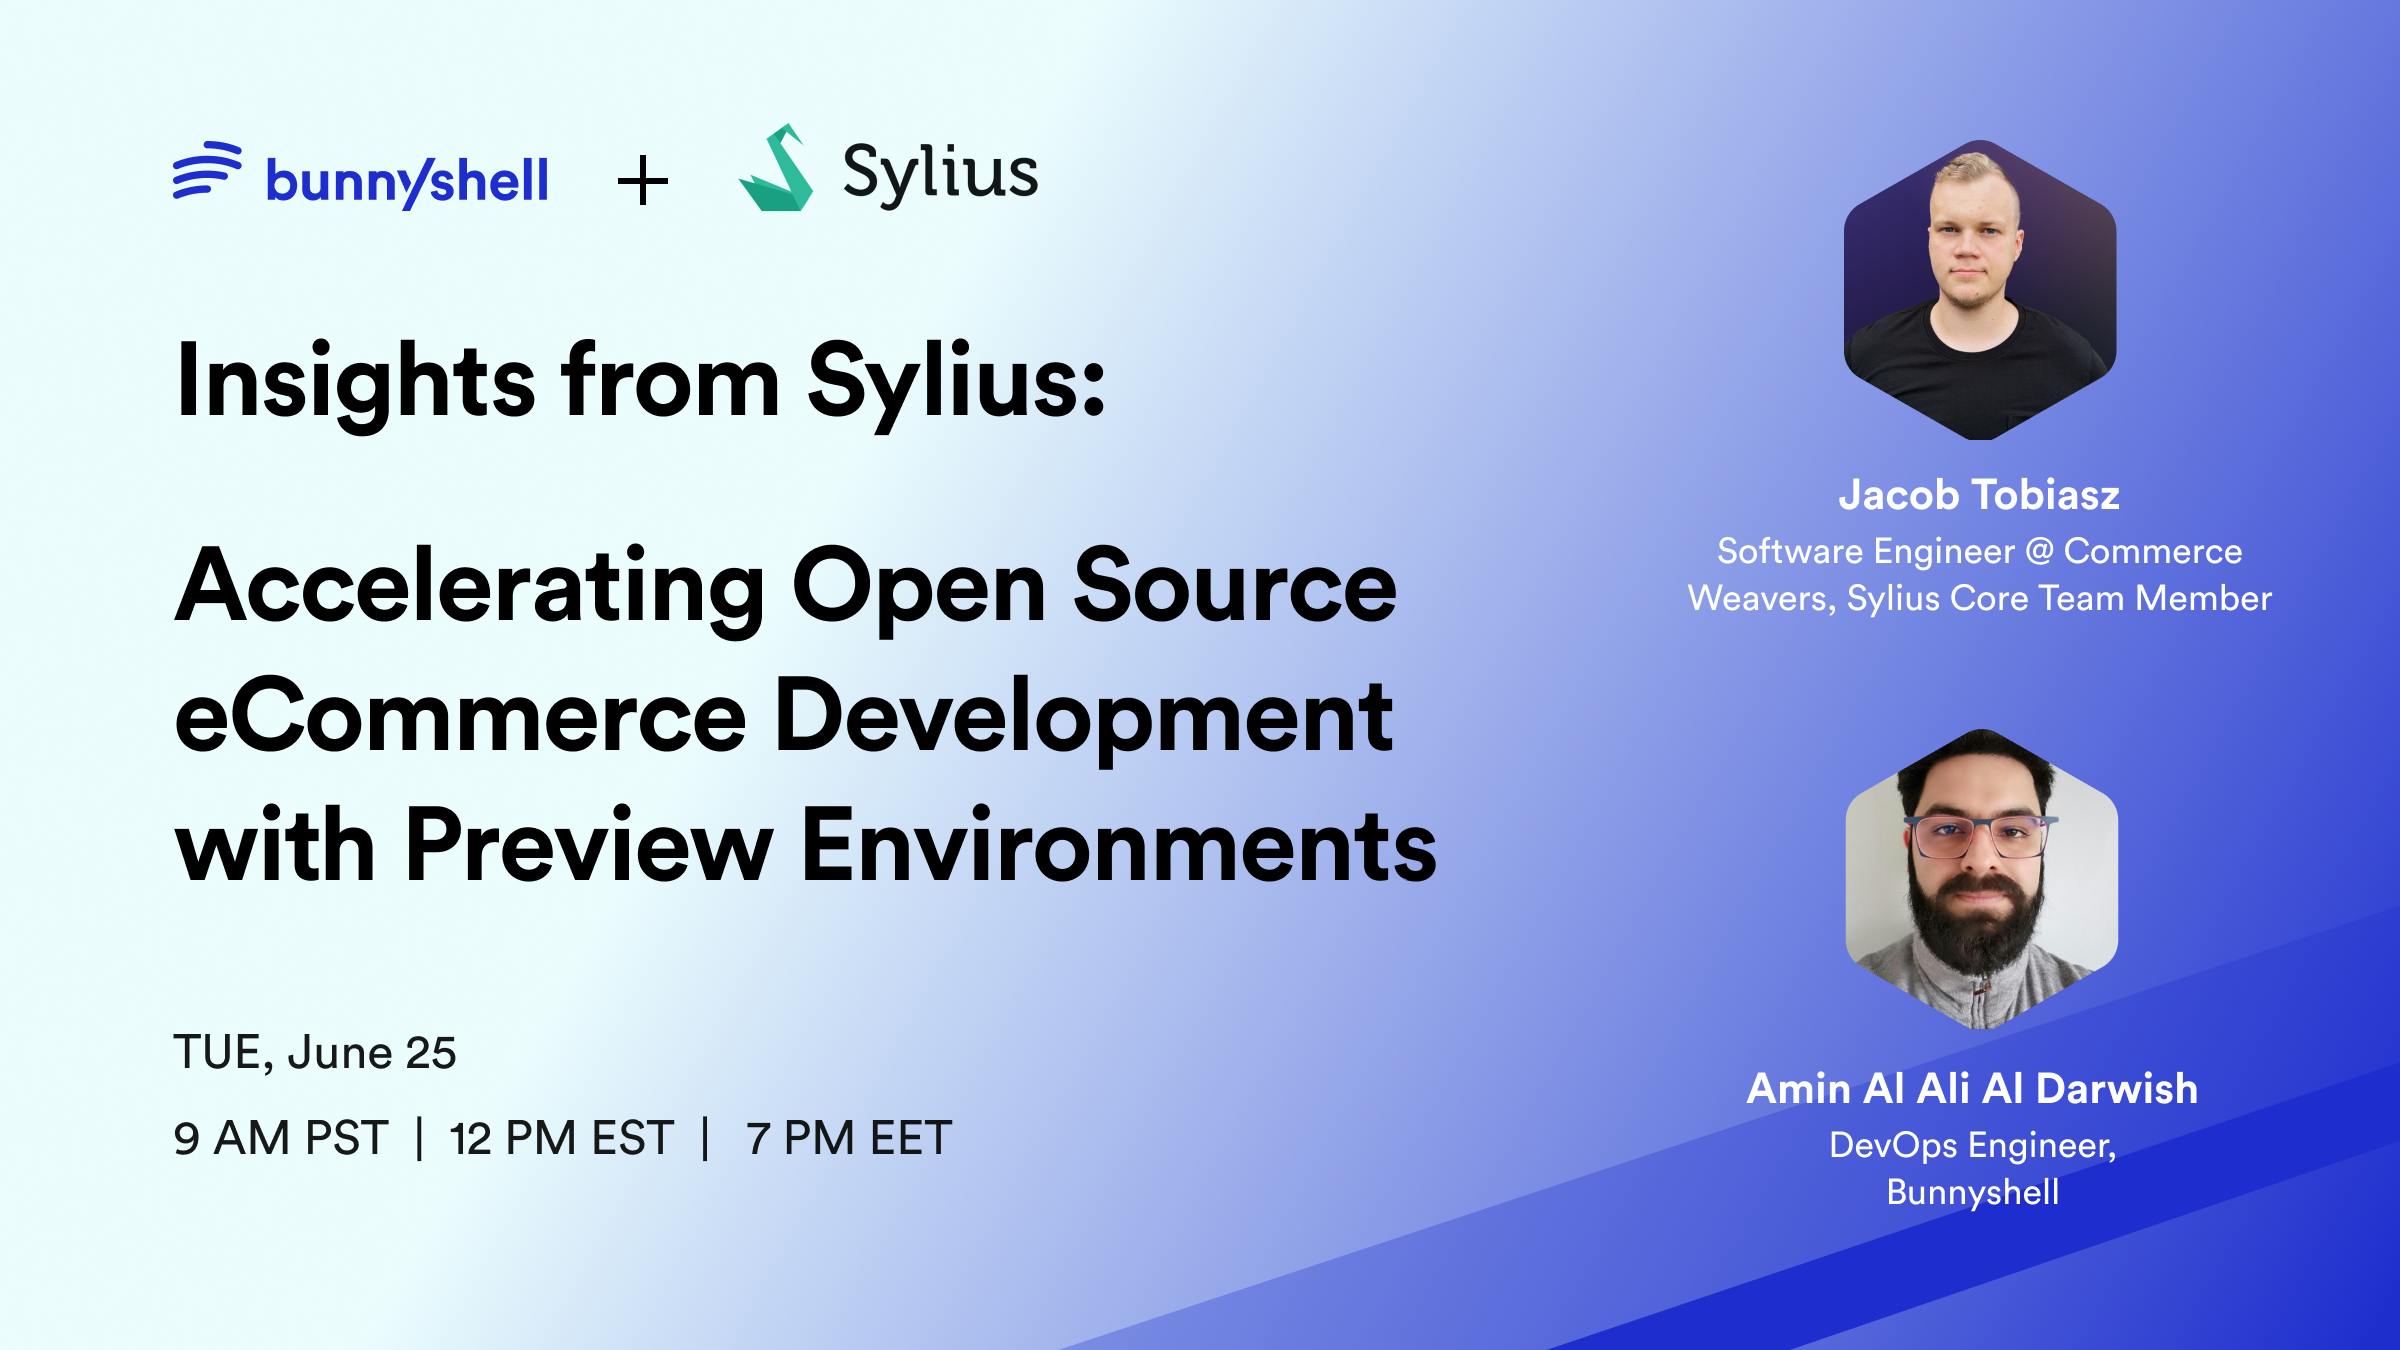 Insights from Sylius: Accelerating Open Source eCommerce Development featured image